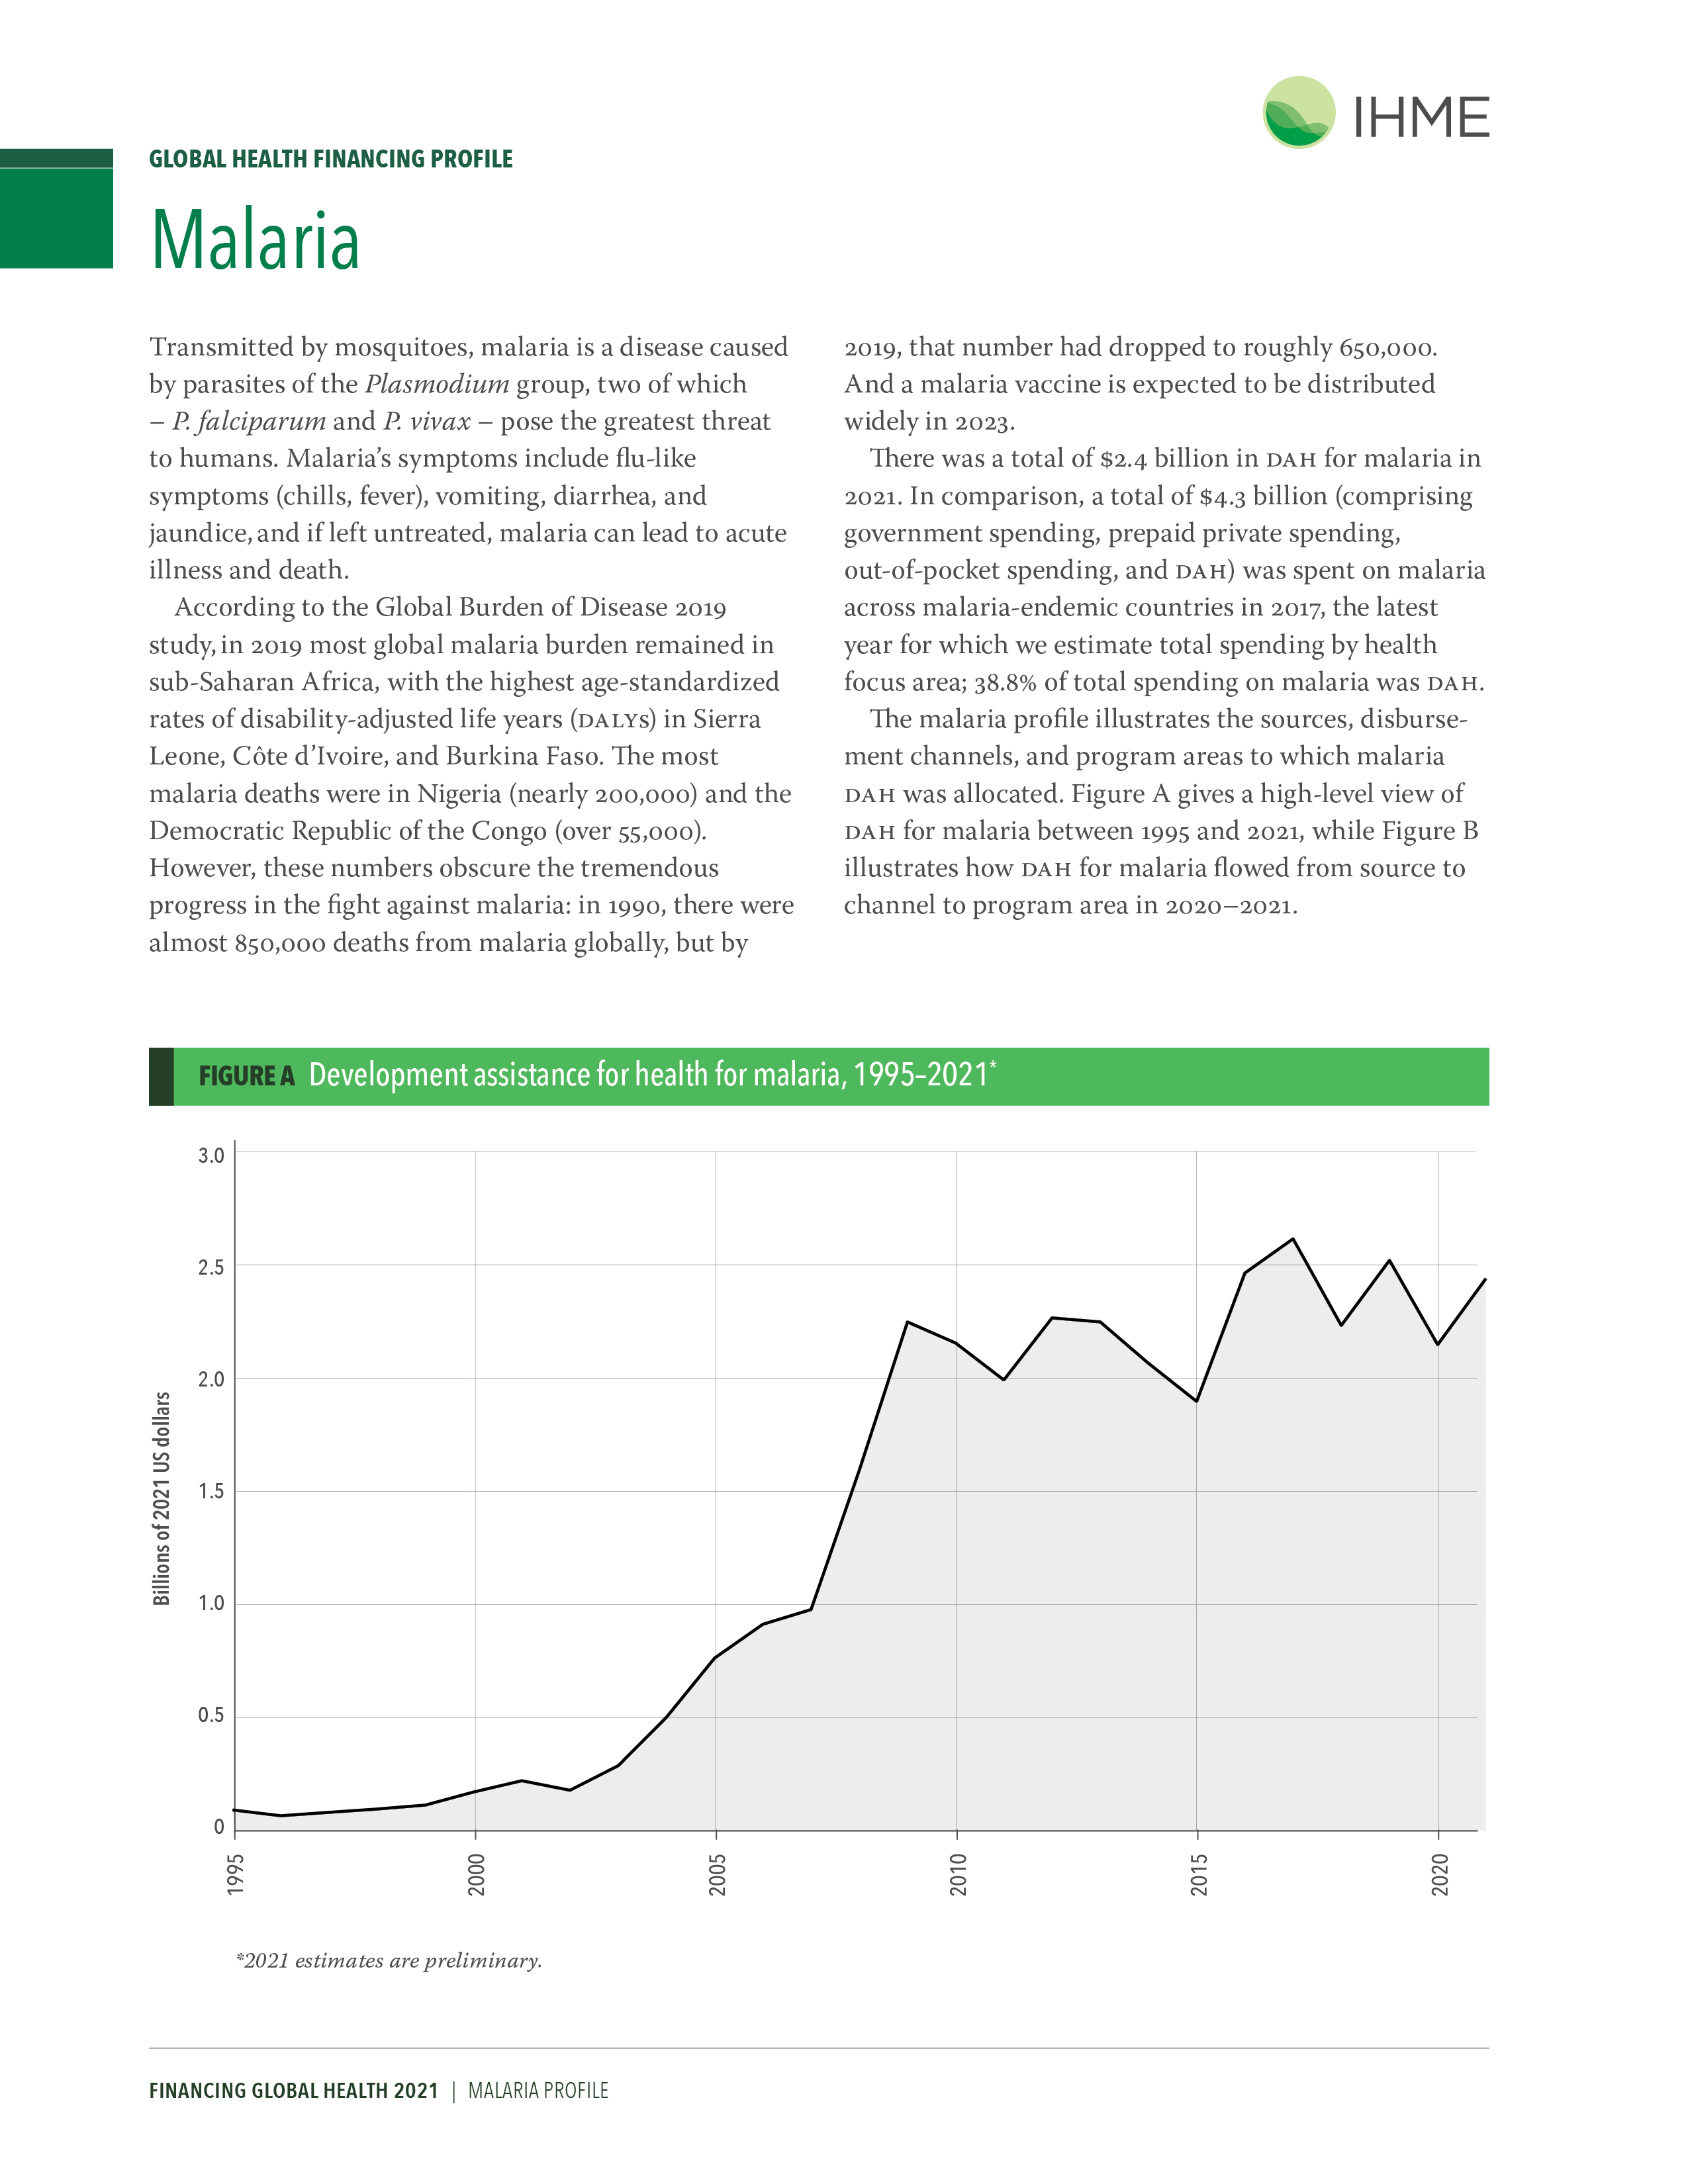 Disease spending profile for malaria: page 1 provides an overview of the expenses of malaria globally and development assistance for health. Download the profile for more details. 